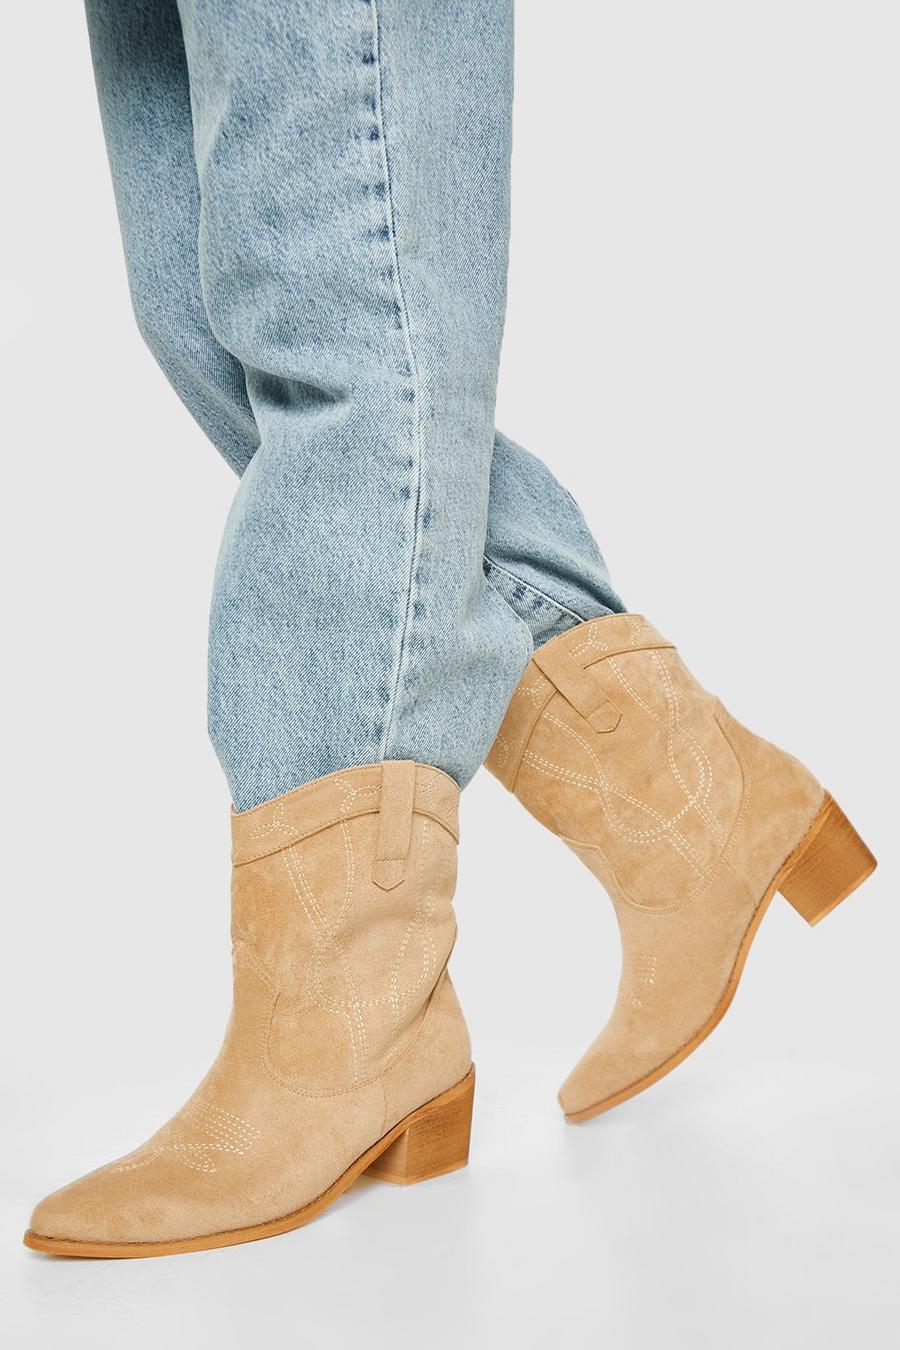 Tan brown Wide Fit Stitch Detail Ankle Western Cowboy Boots